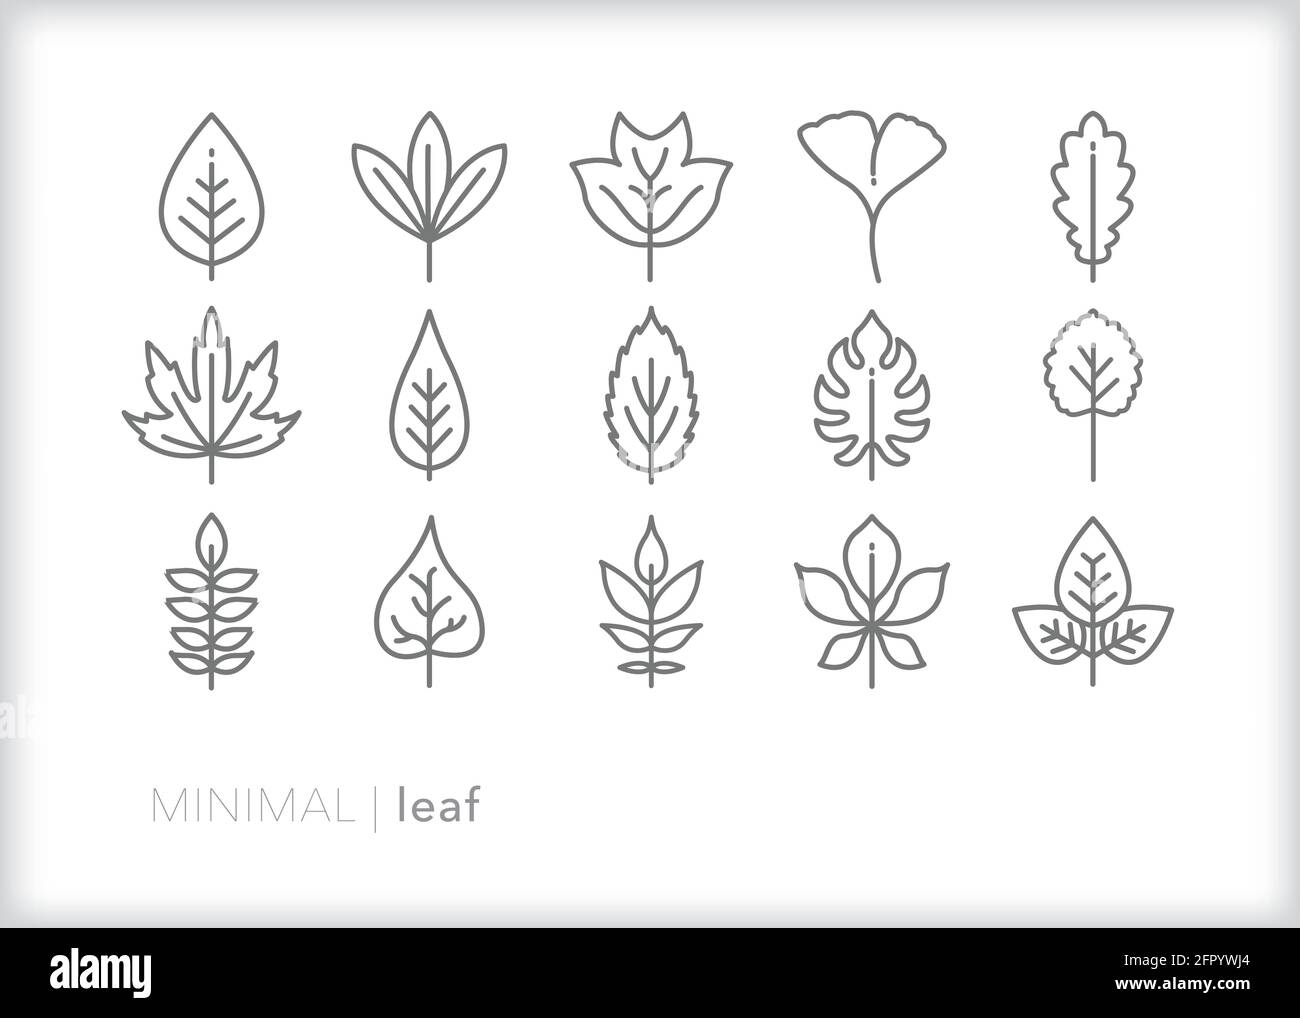 Set of leaf outline icons from different types of trees Stock Vector